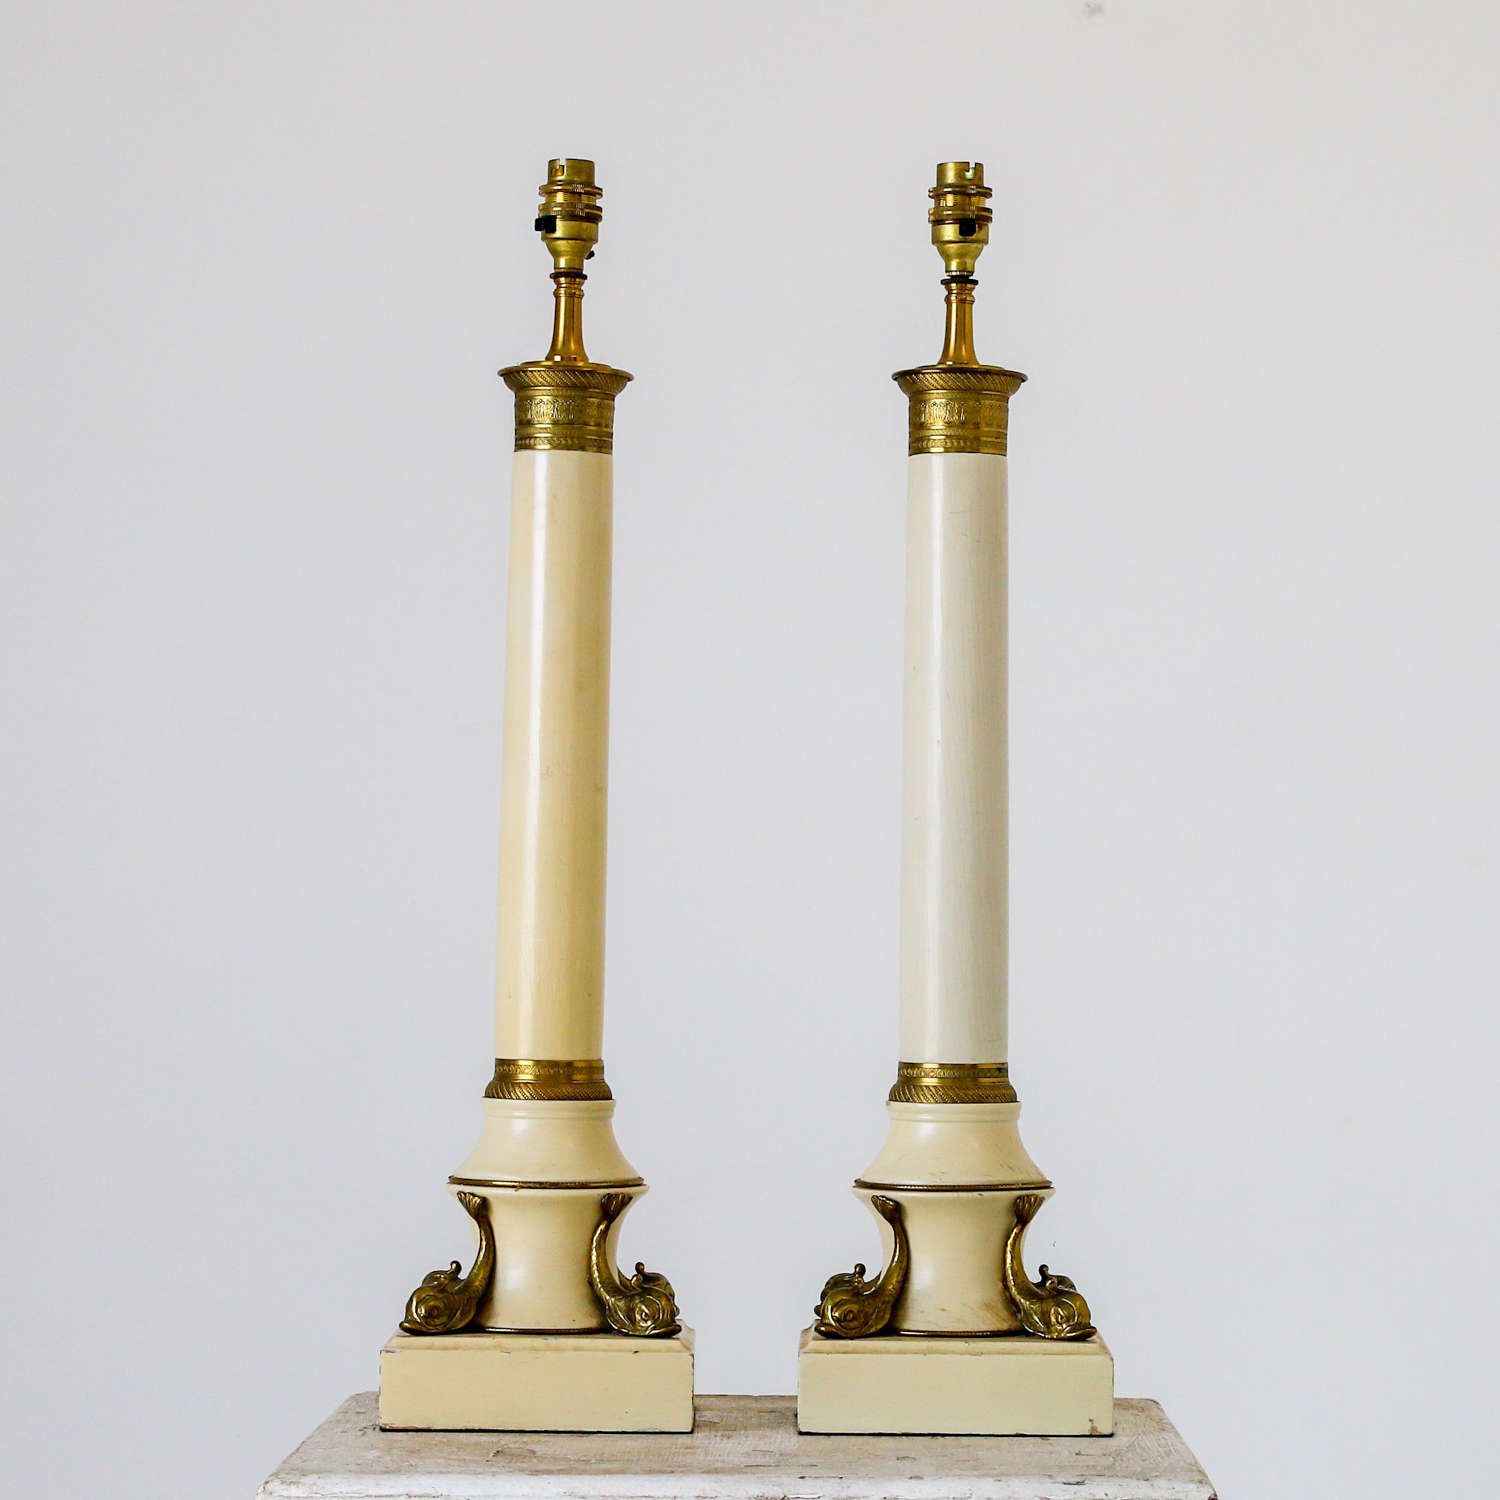 Pair of Tall French Empire Style Lamps